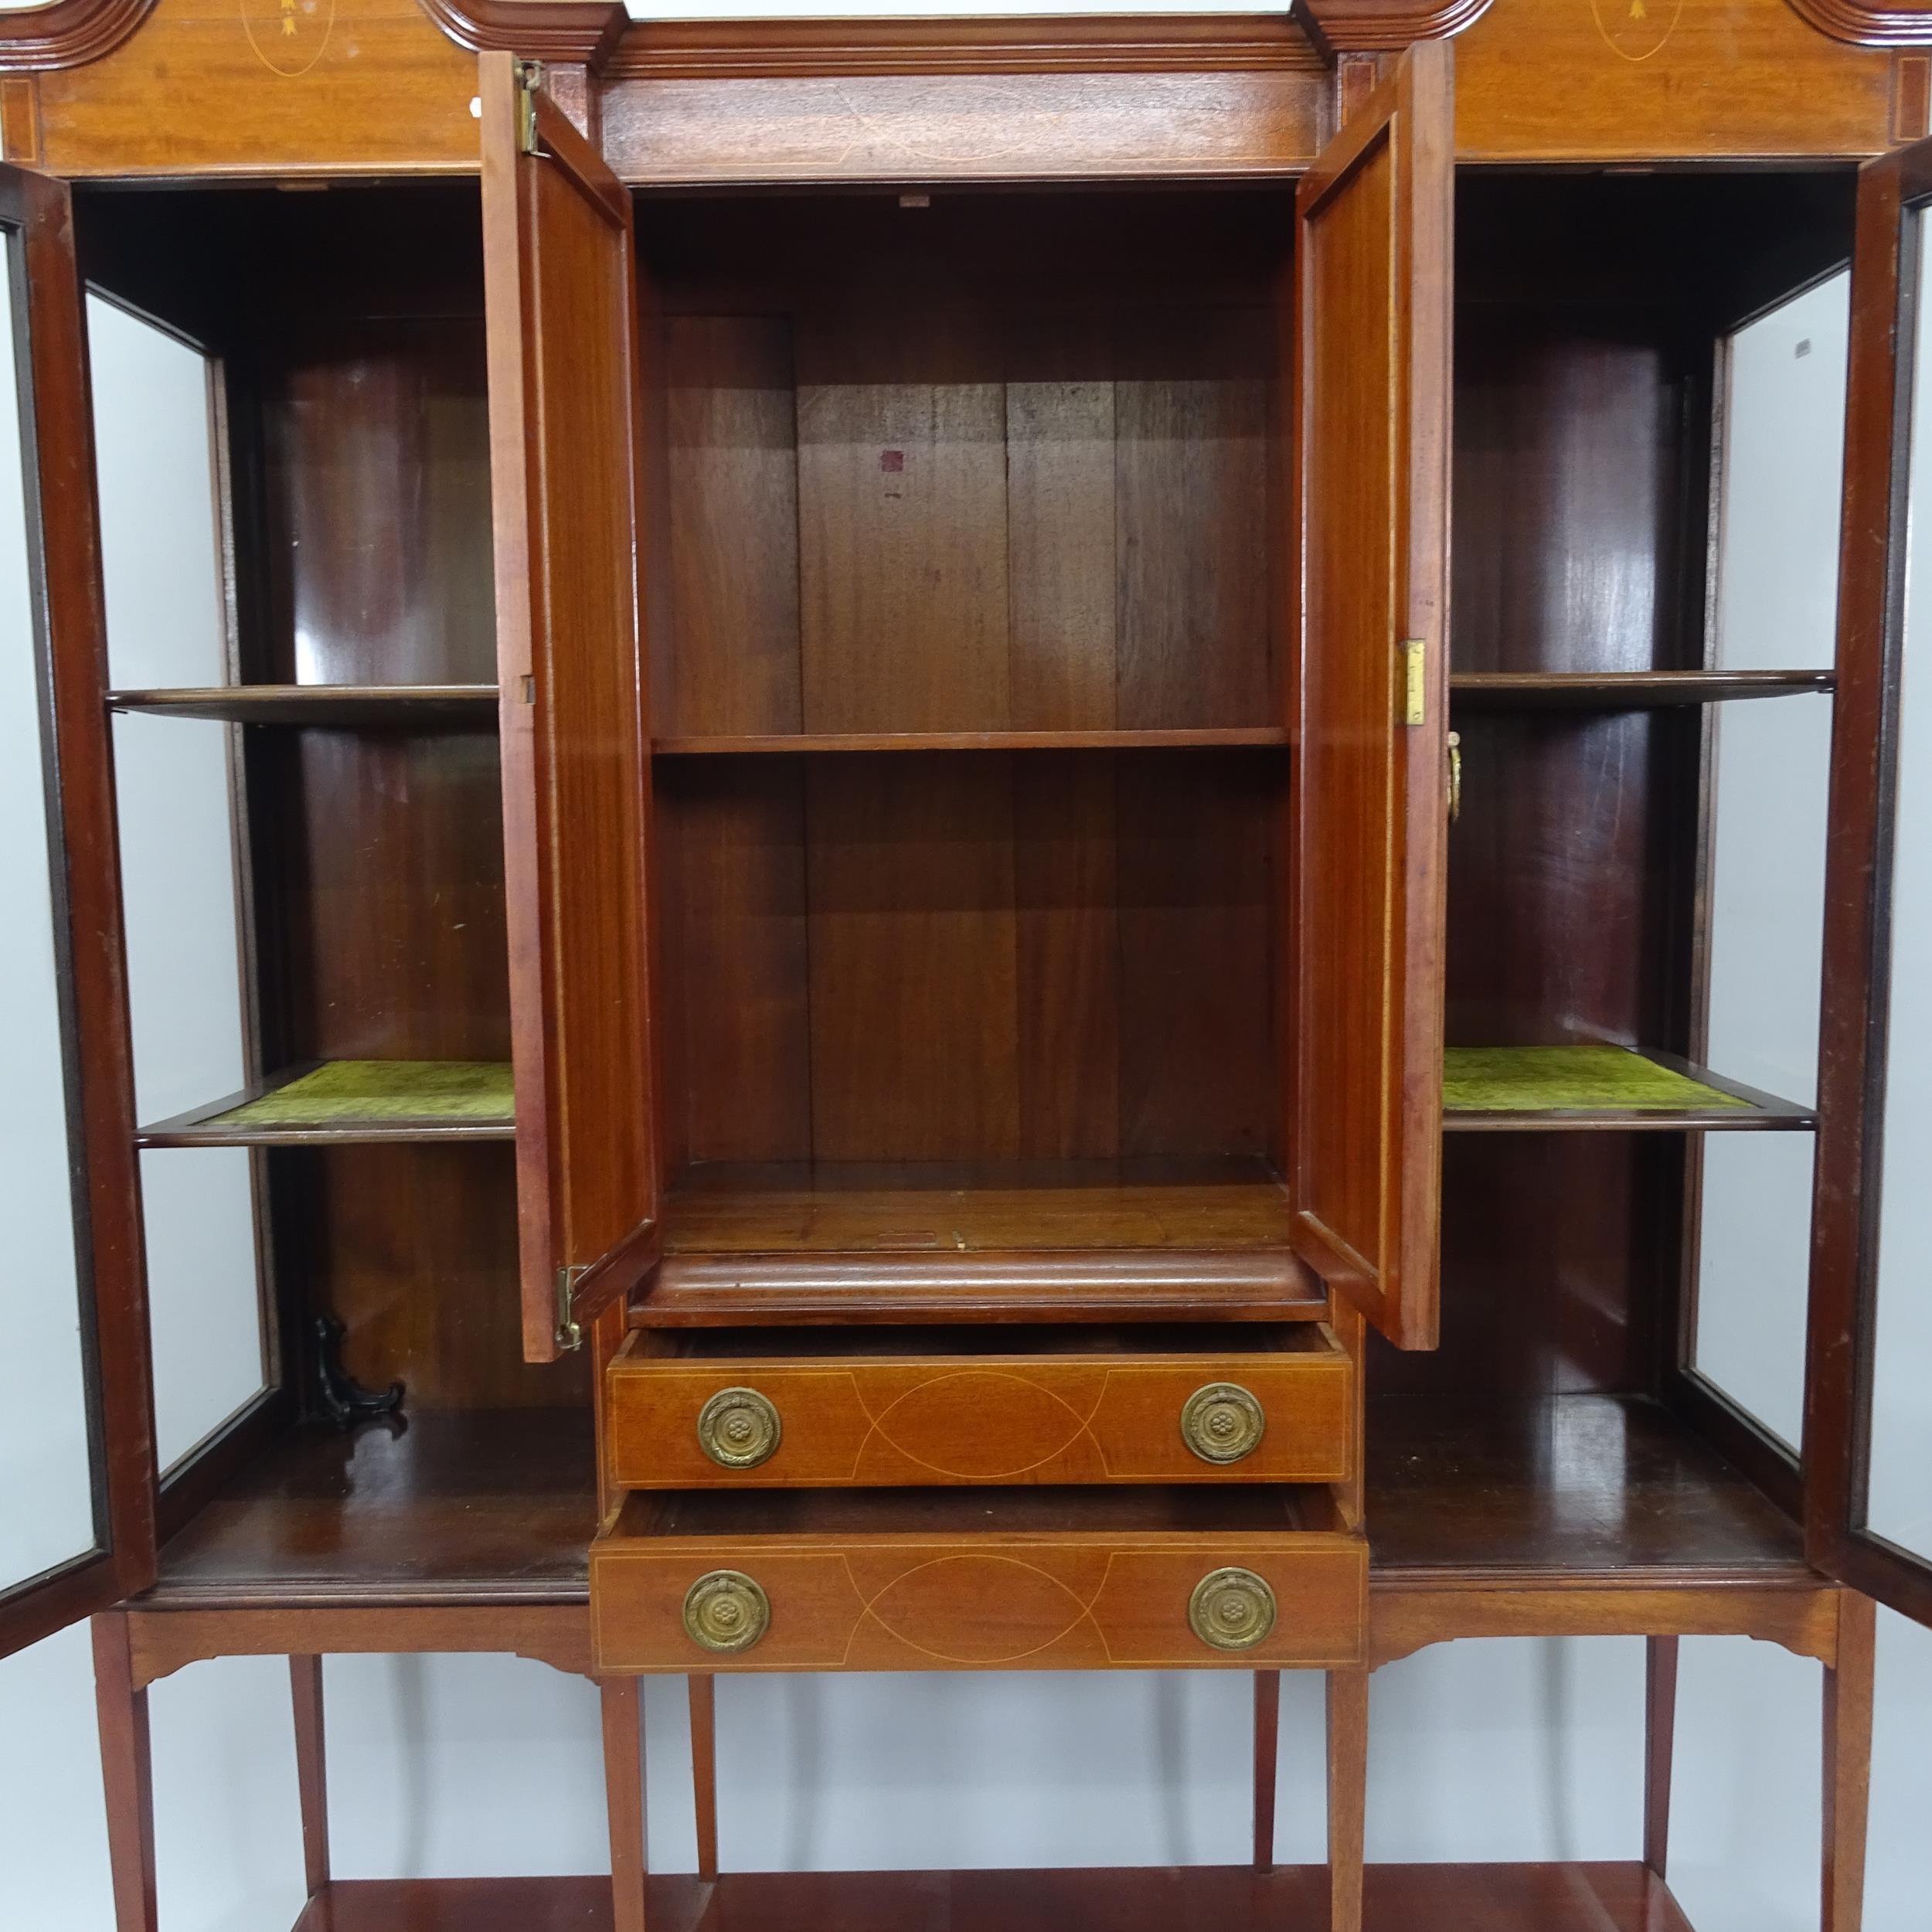 A 19th century mahogany inverted break-front cabinet on stand in 2 sections, 141cm x 195cm x 43cm - Image 2 of 2